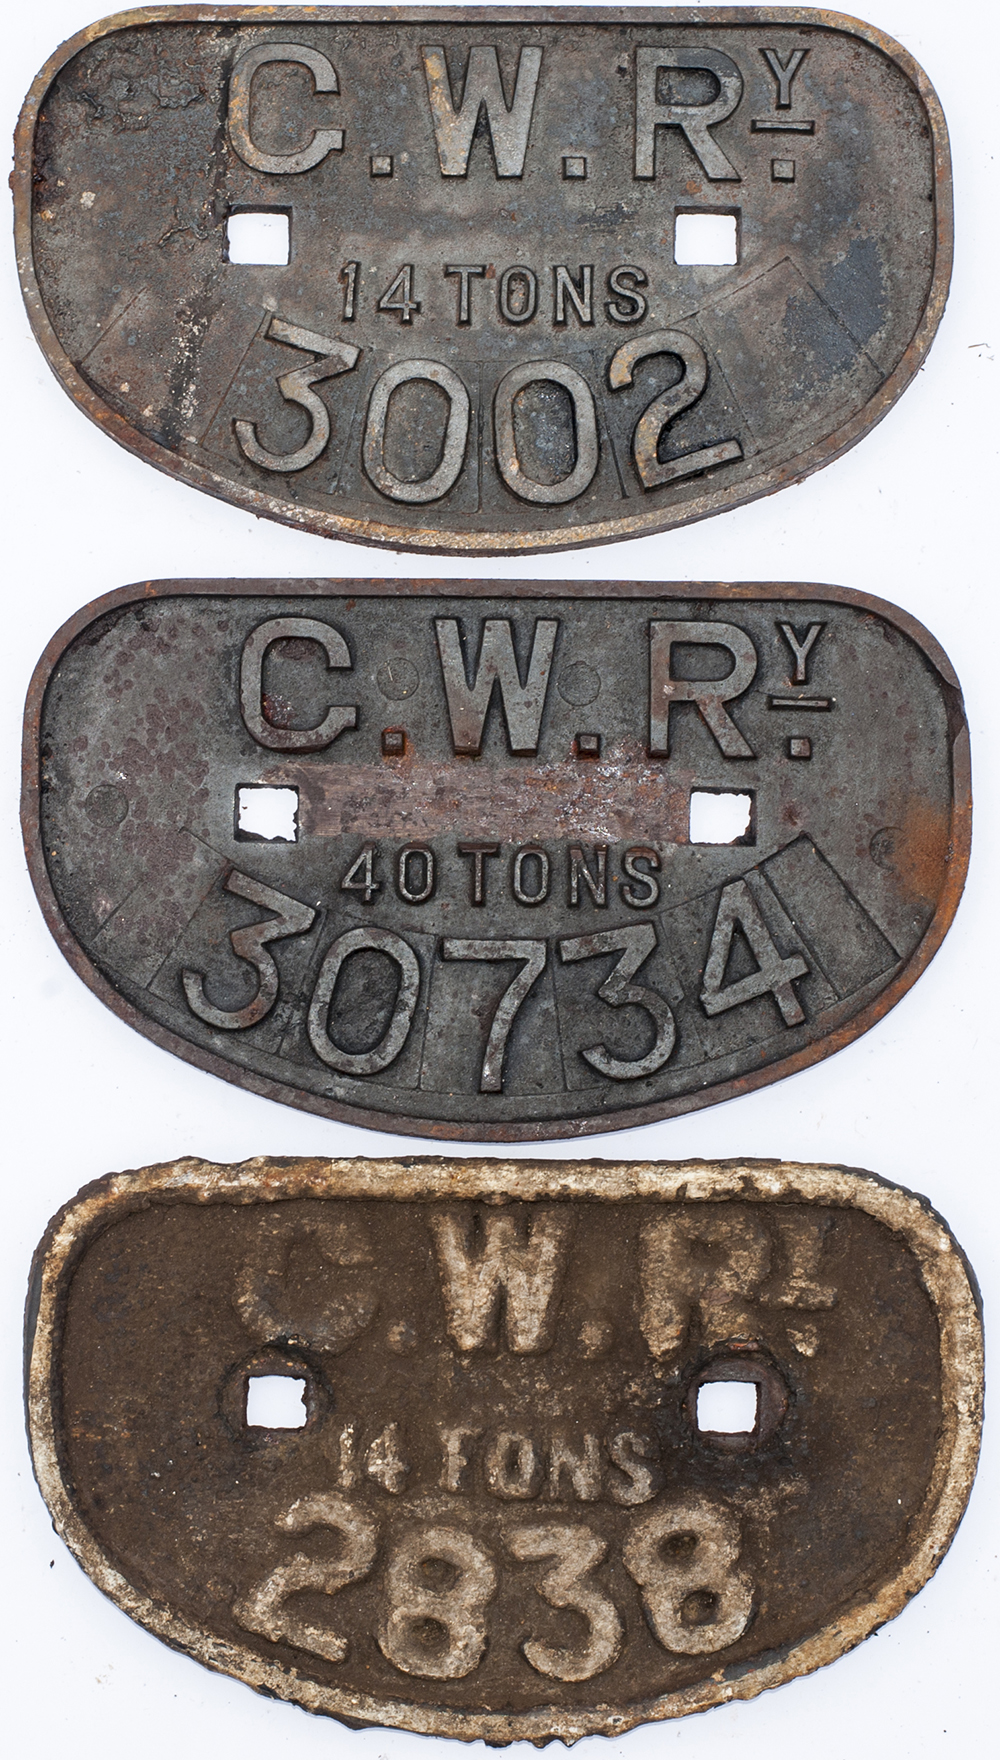 3 x GWR D Wagon plates.2 x 14 tons together with 40 tons.